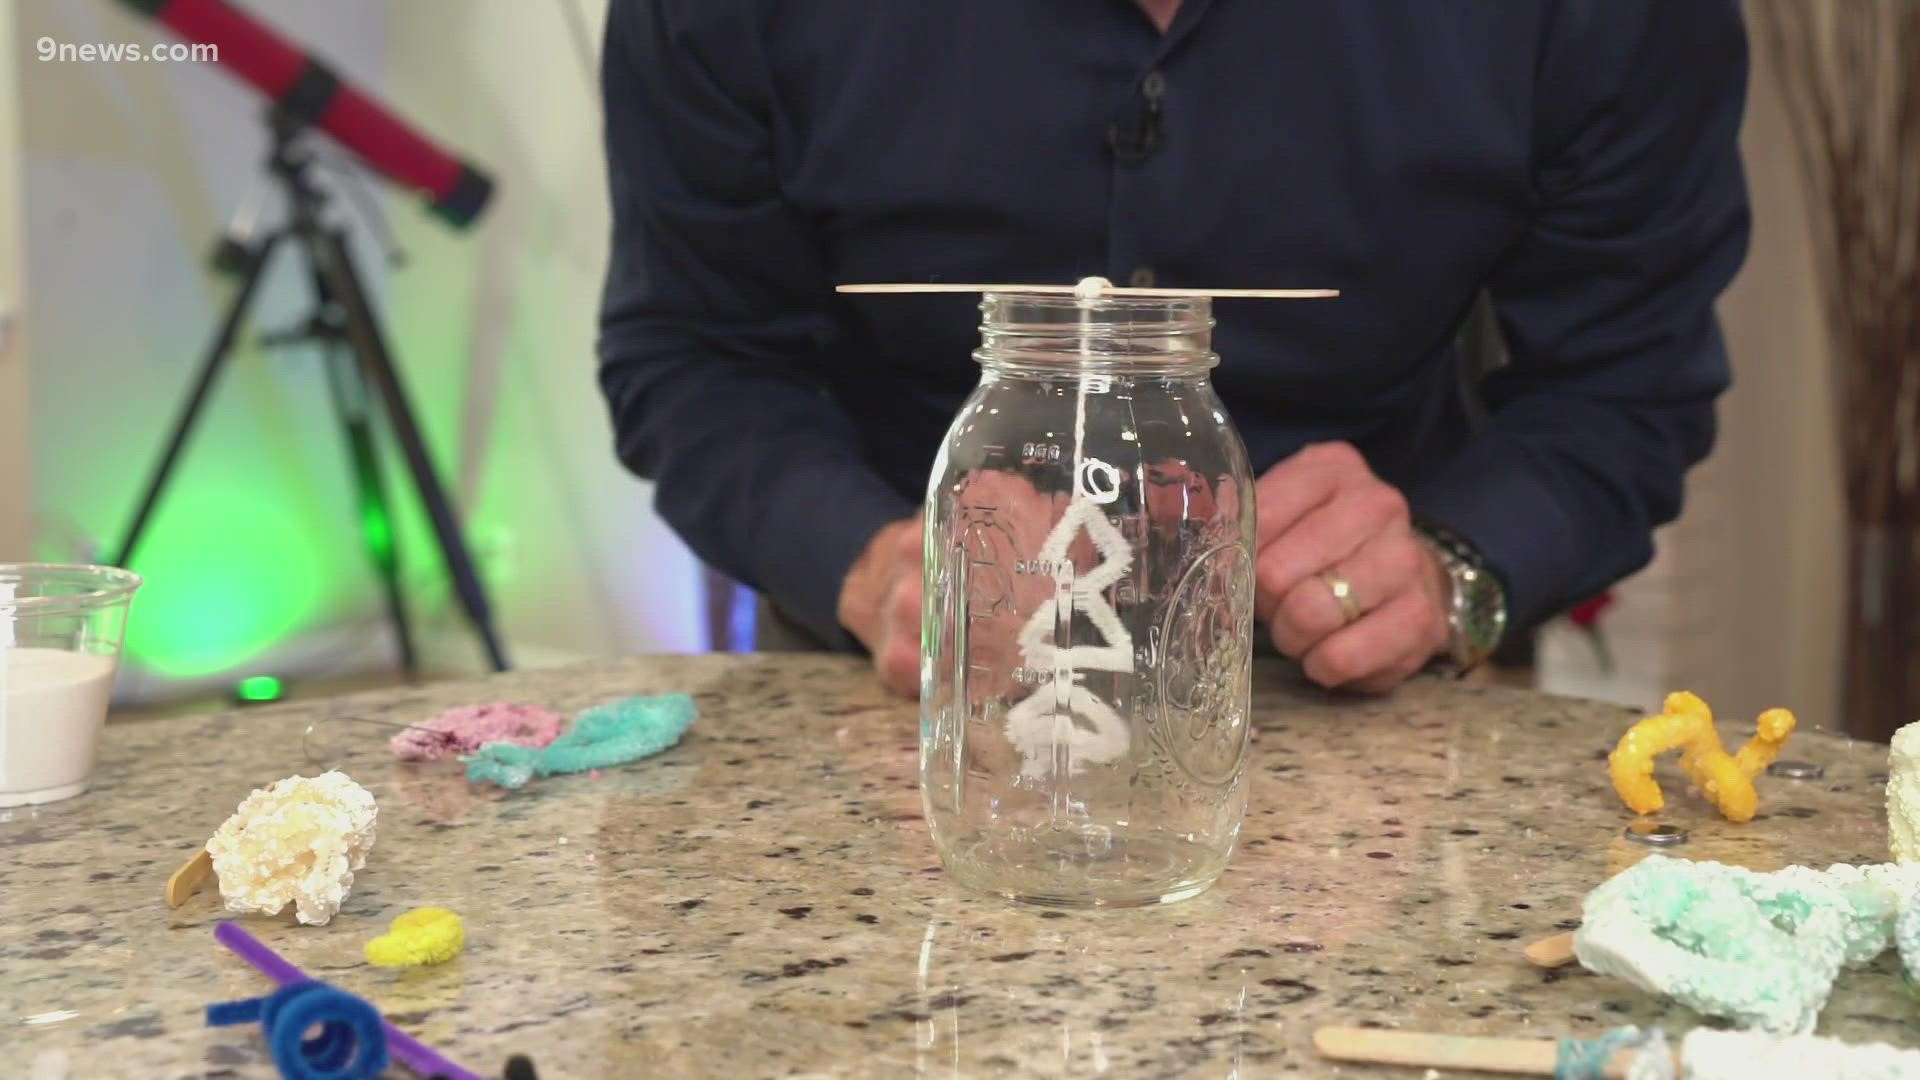 Most people buy holiday ornaments at the store.
but Steve Spangler wants you to try your hand at growing them using a little science experiment.